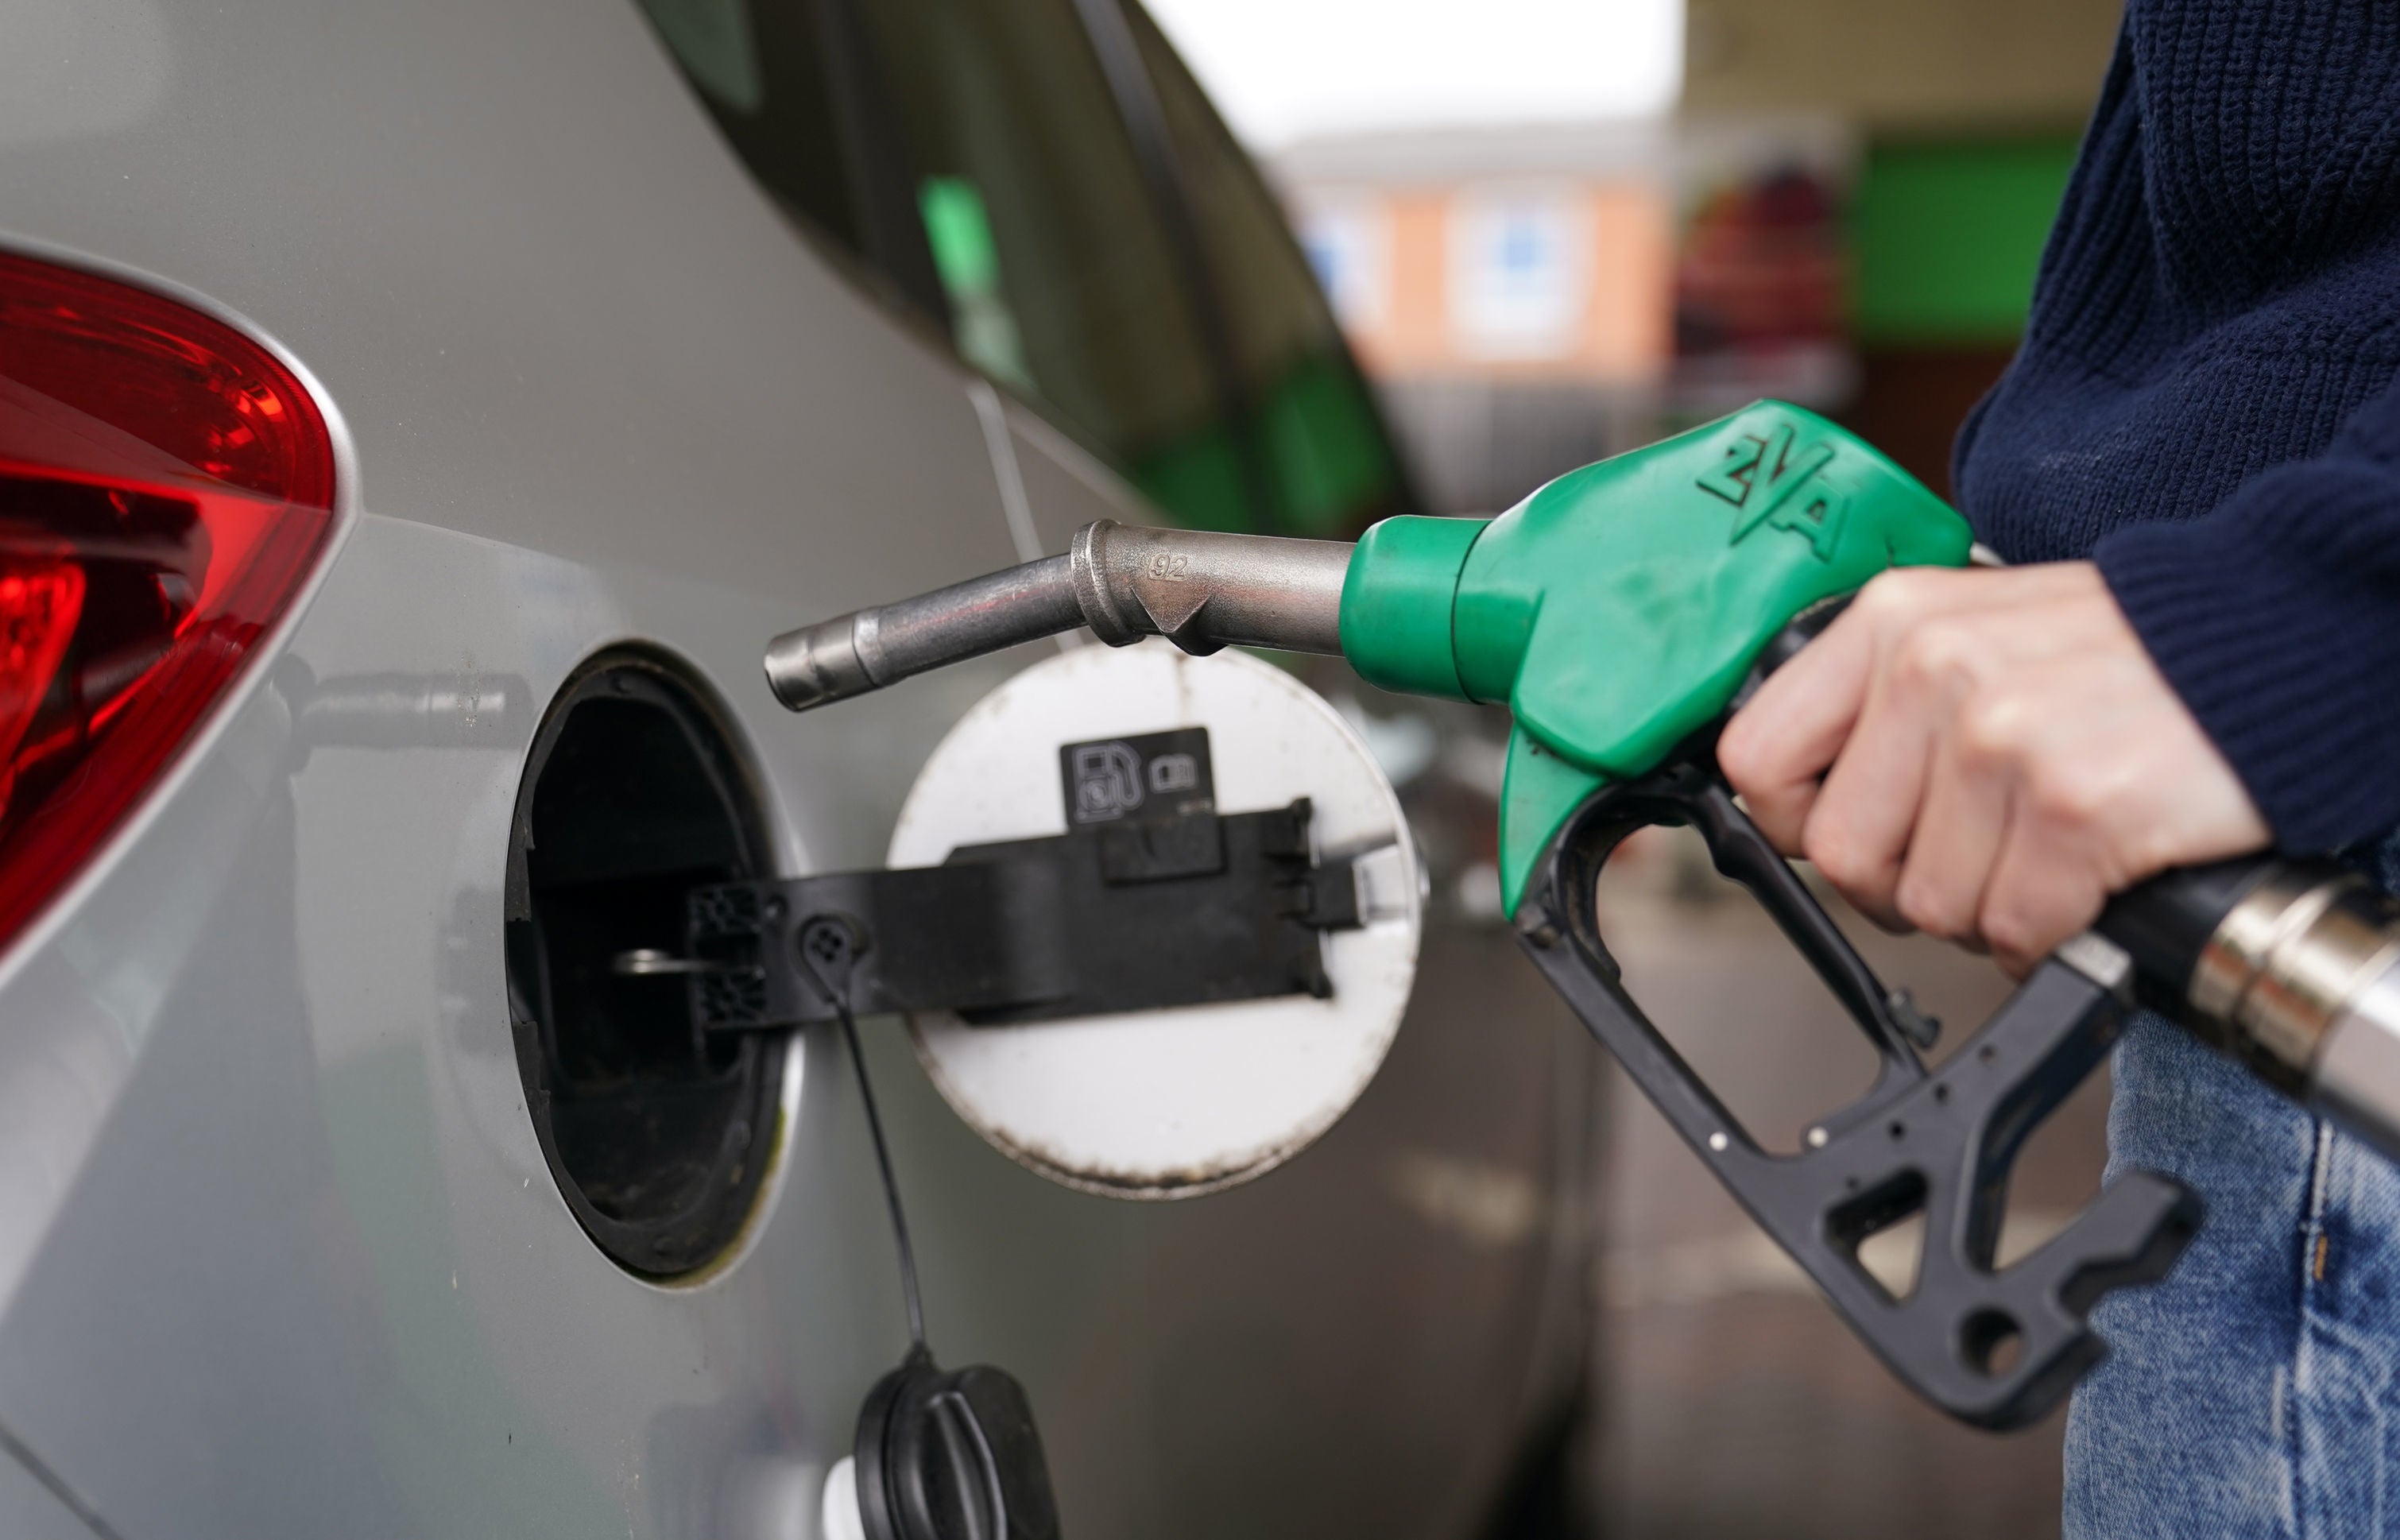 Drivers were hit by one of the biggest monthly fuel price rises in more than two decades in August, new figures show